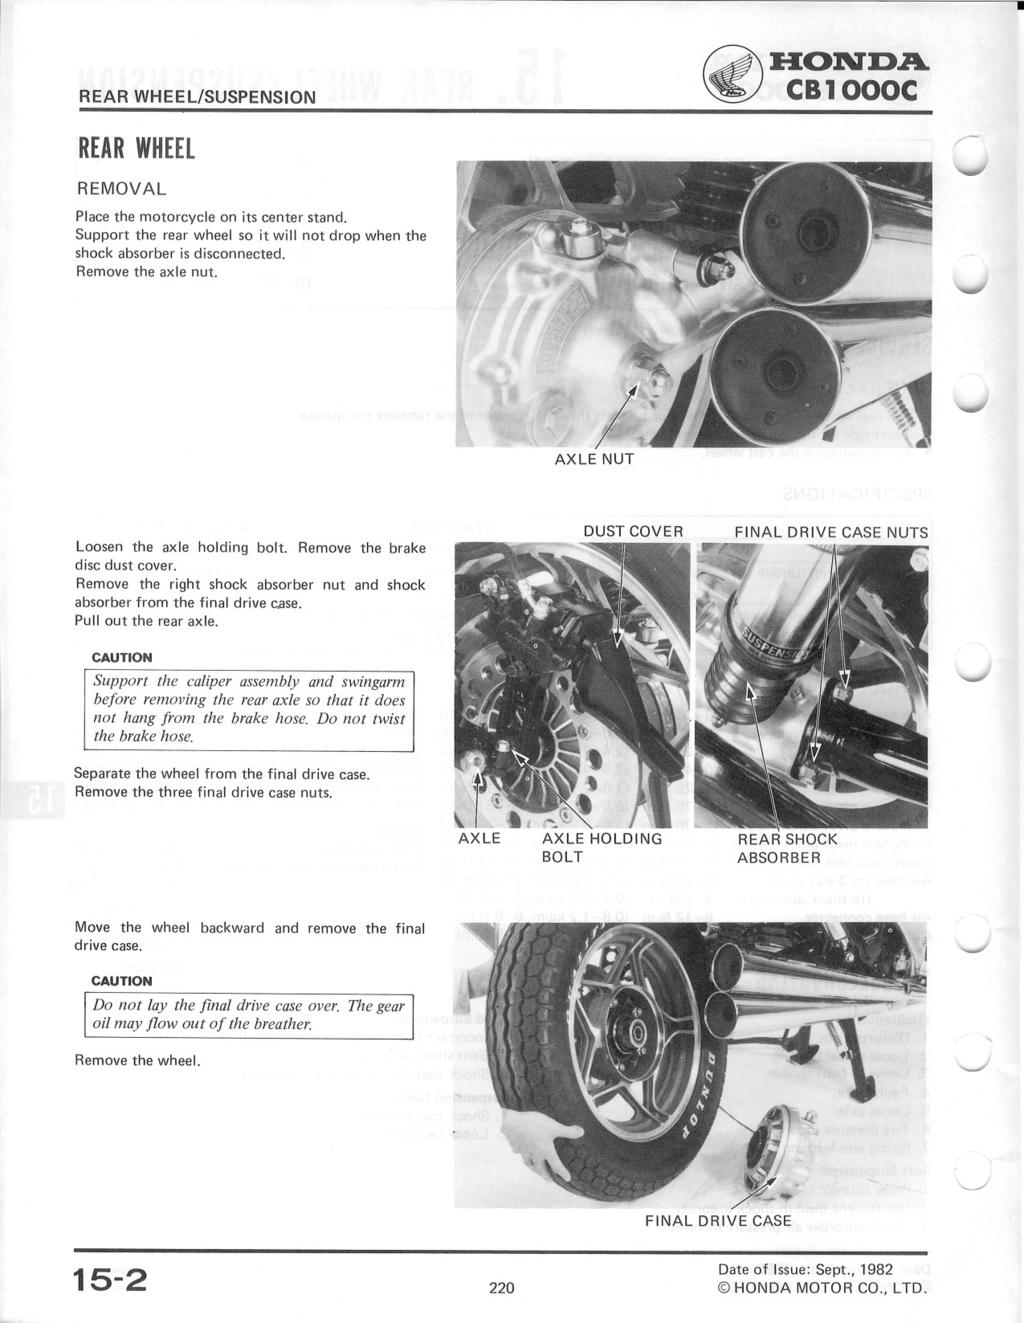 ~:H:Ol\TD.A. ~ CB1000C WHEEL REMOVAL Place the motorcycle on its center stand. Support the rear wheel so it will not drop when the shock absorber is disconnected. Remove the axle nut.